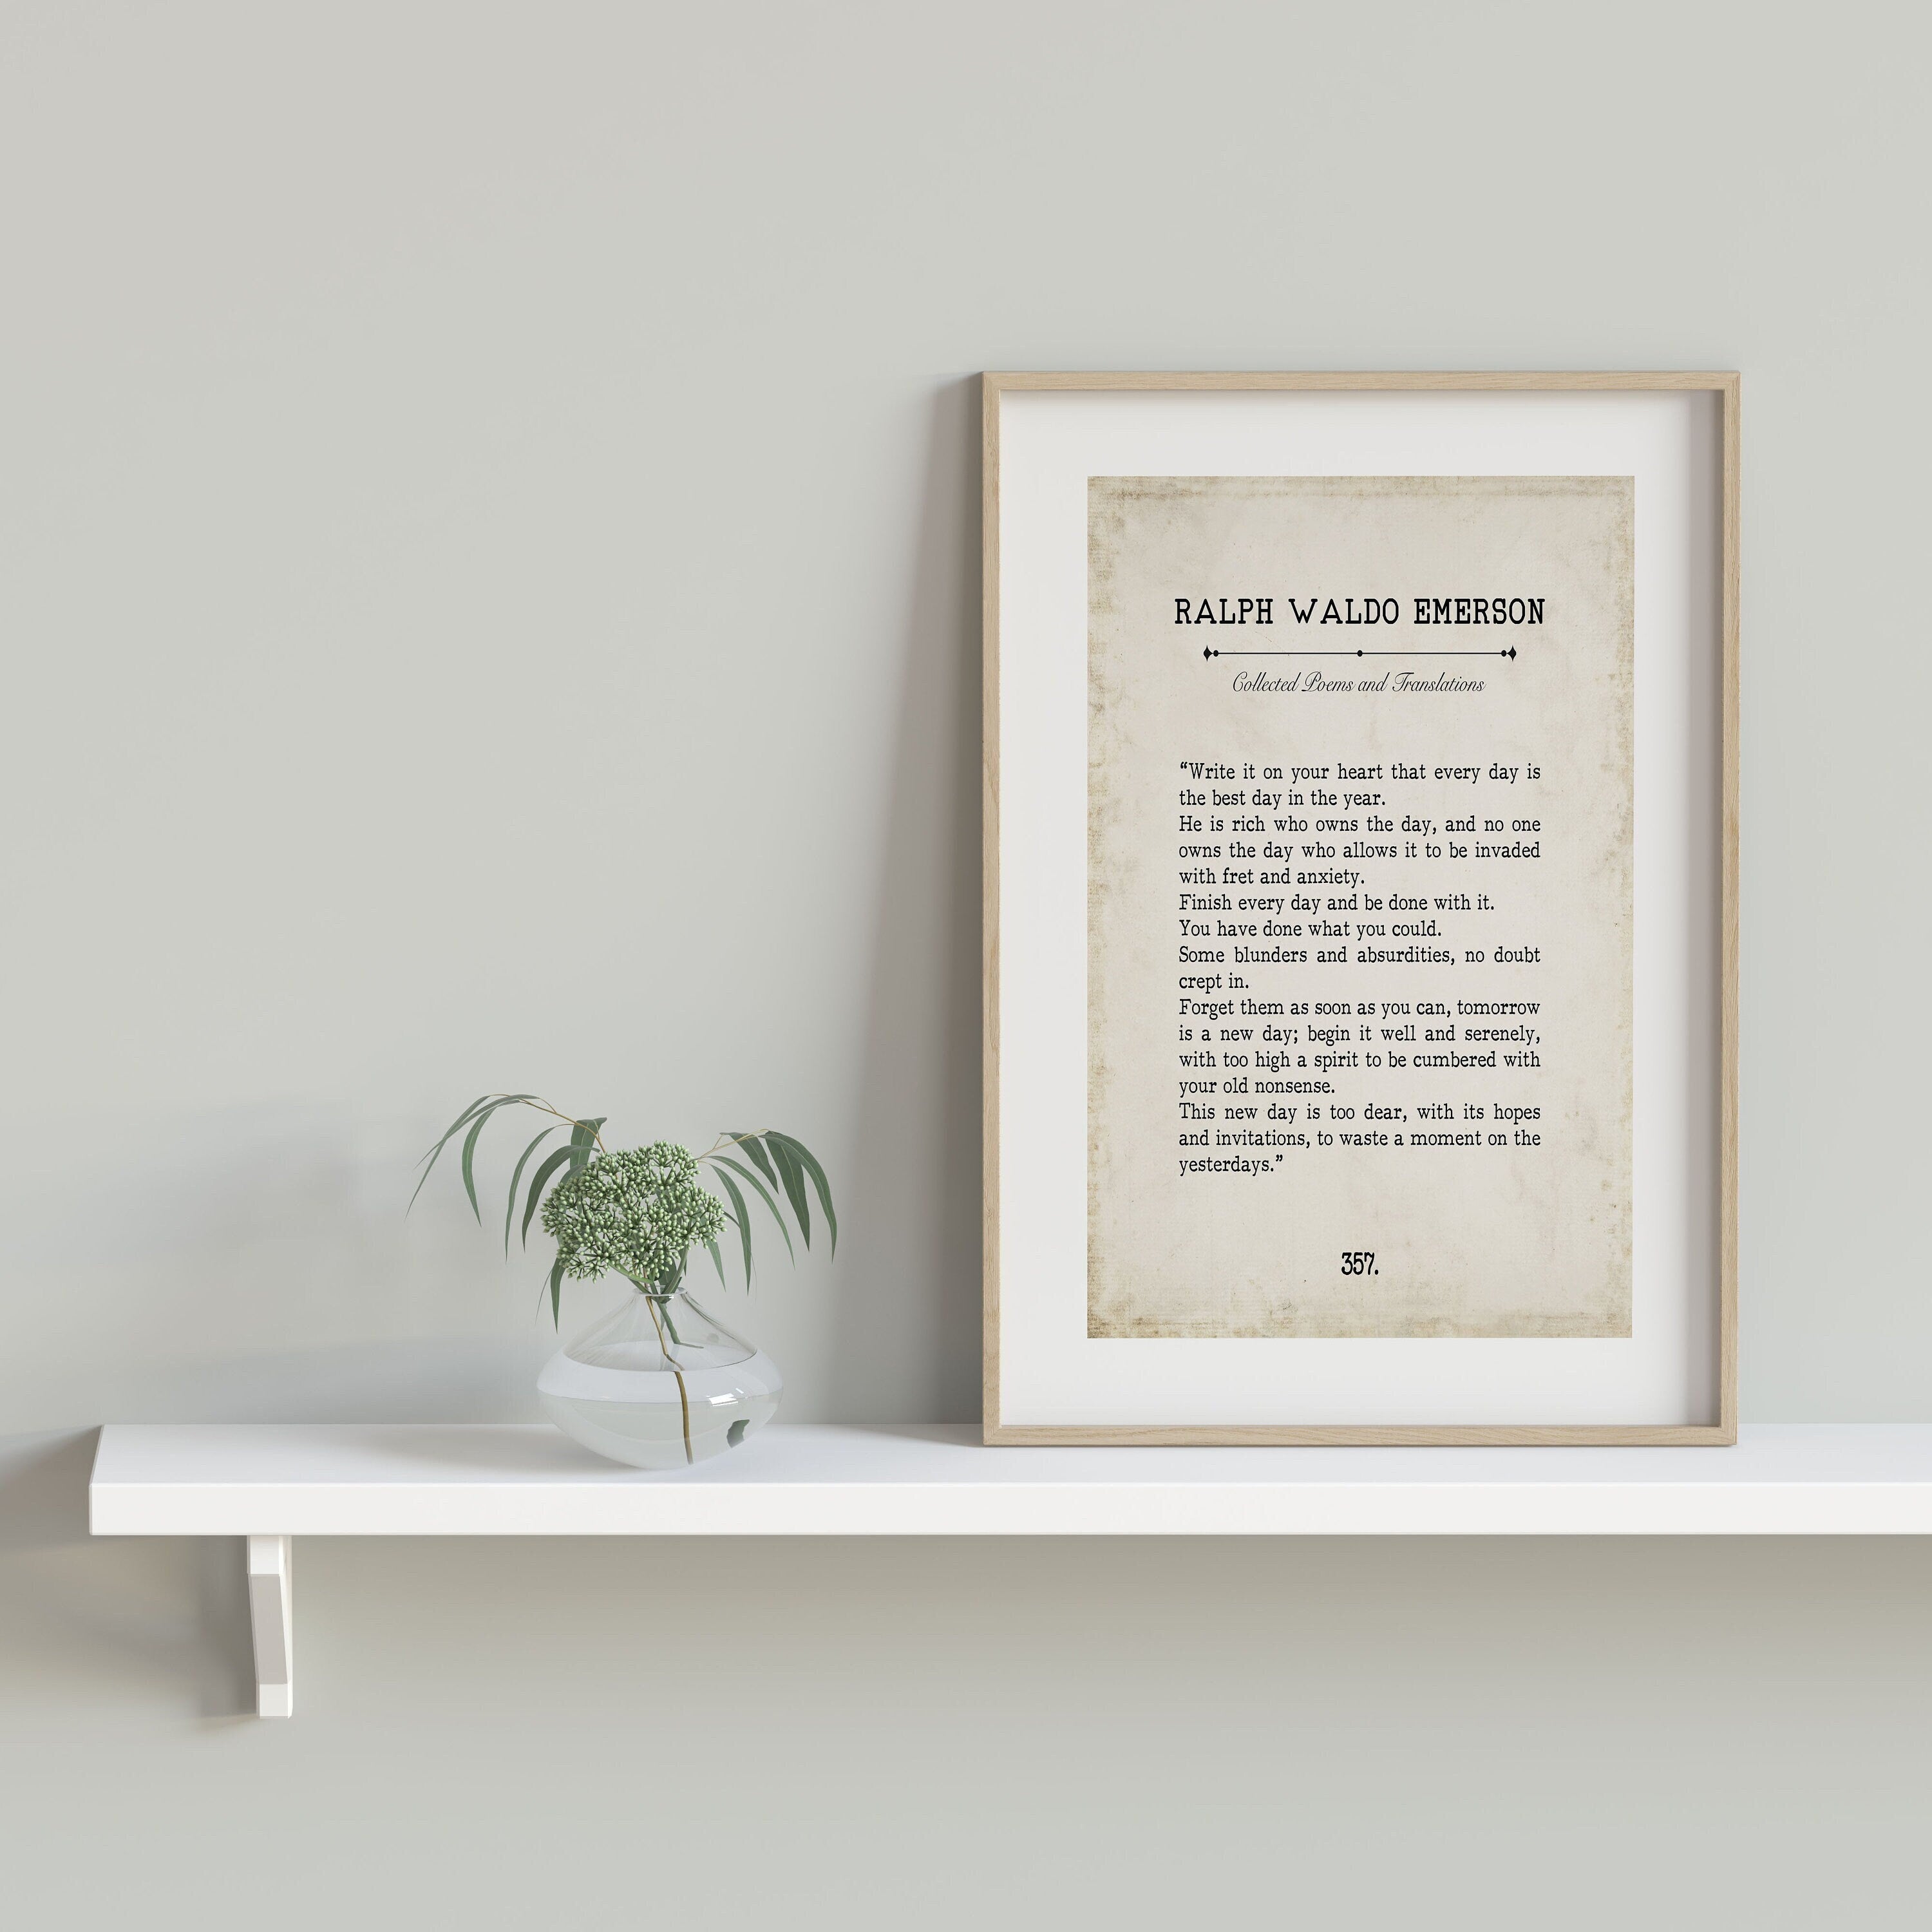 Ralph Waldo Emerson Book Page Inspirational Wall Art, Write it on your heart that every day is the best Quote Vintage Style Print Wall Decor